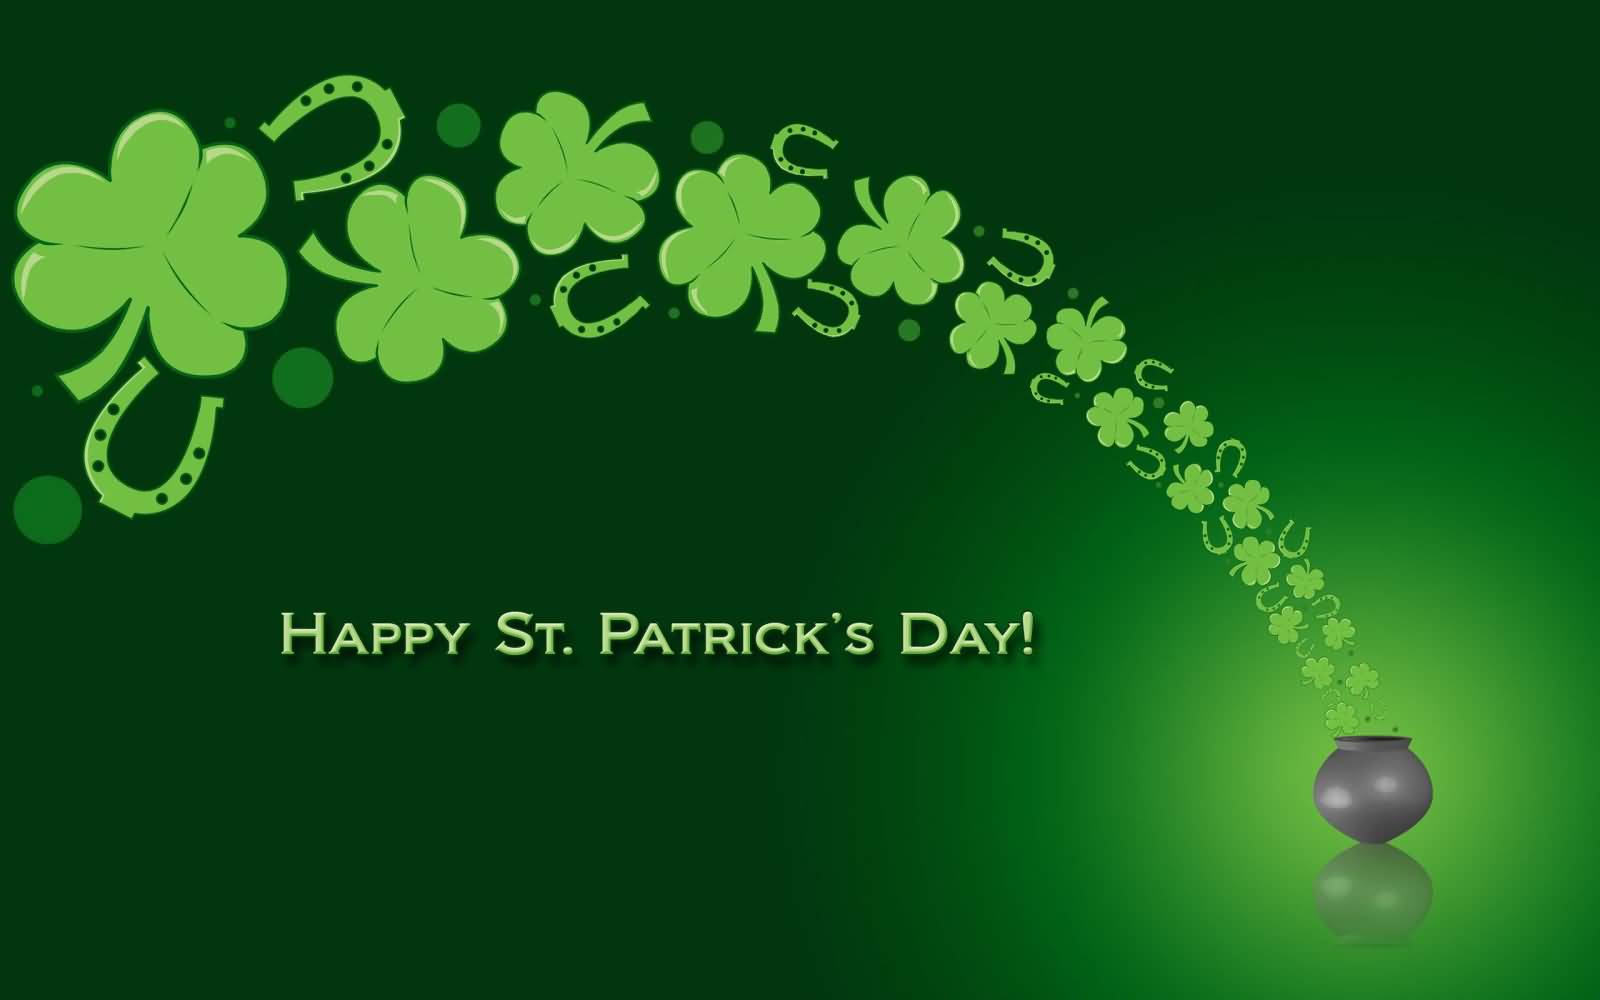 Happy Saint Patrick's Day Clover Leafs In Pot Wallpaper